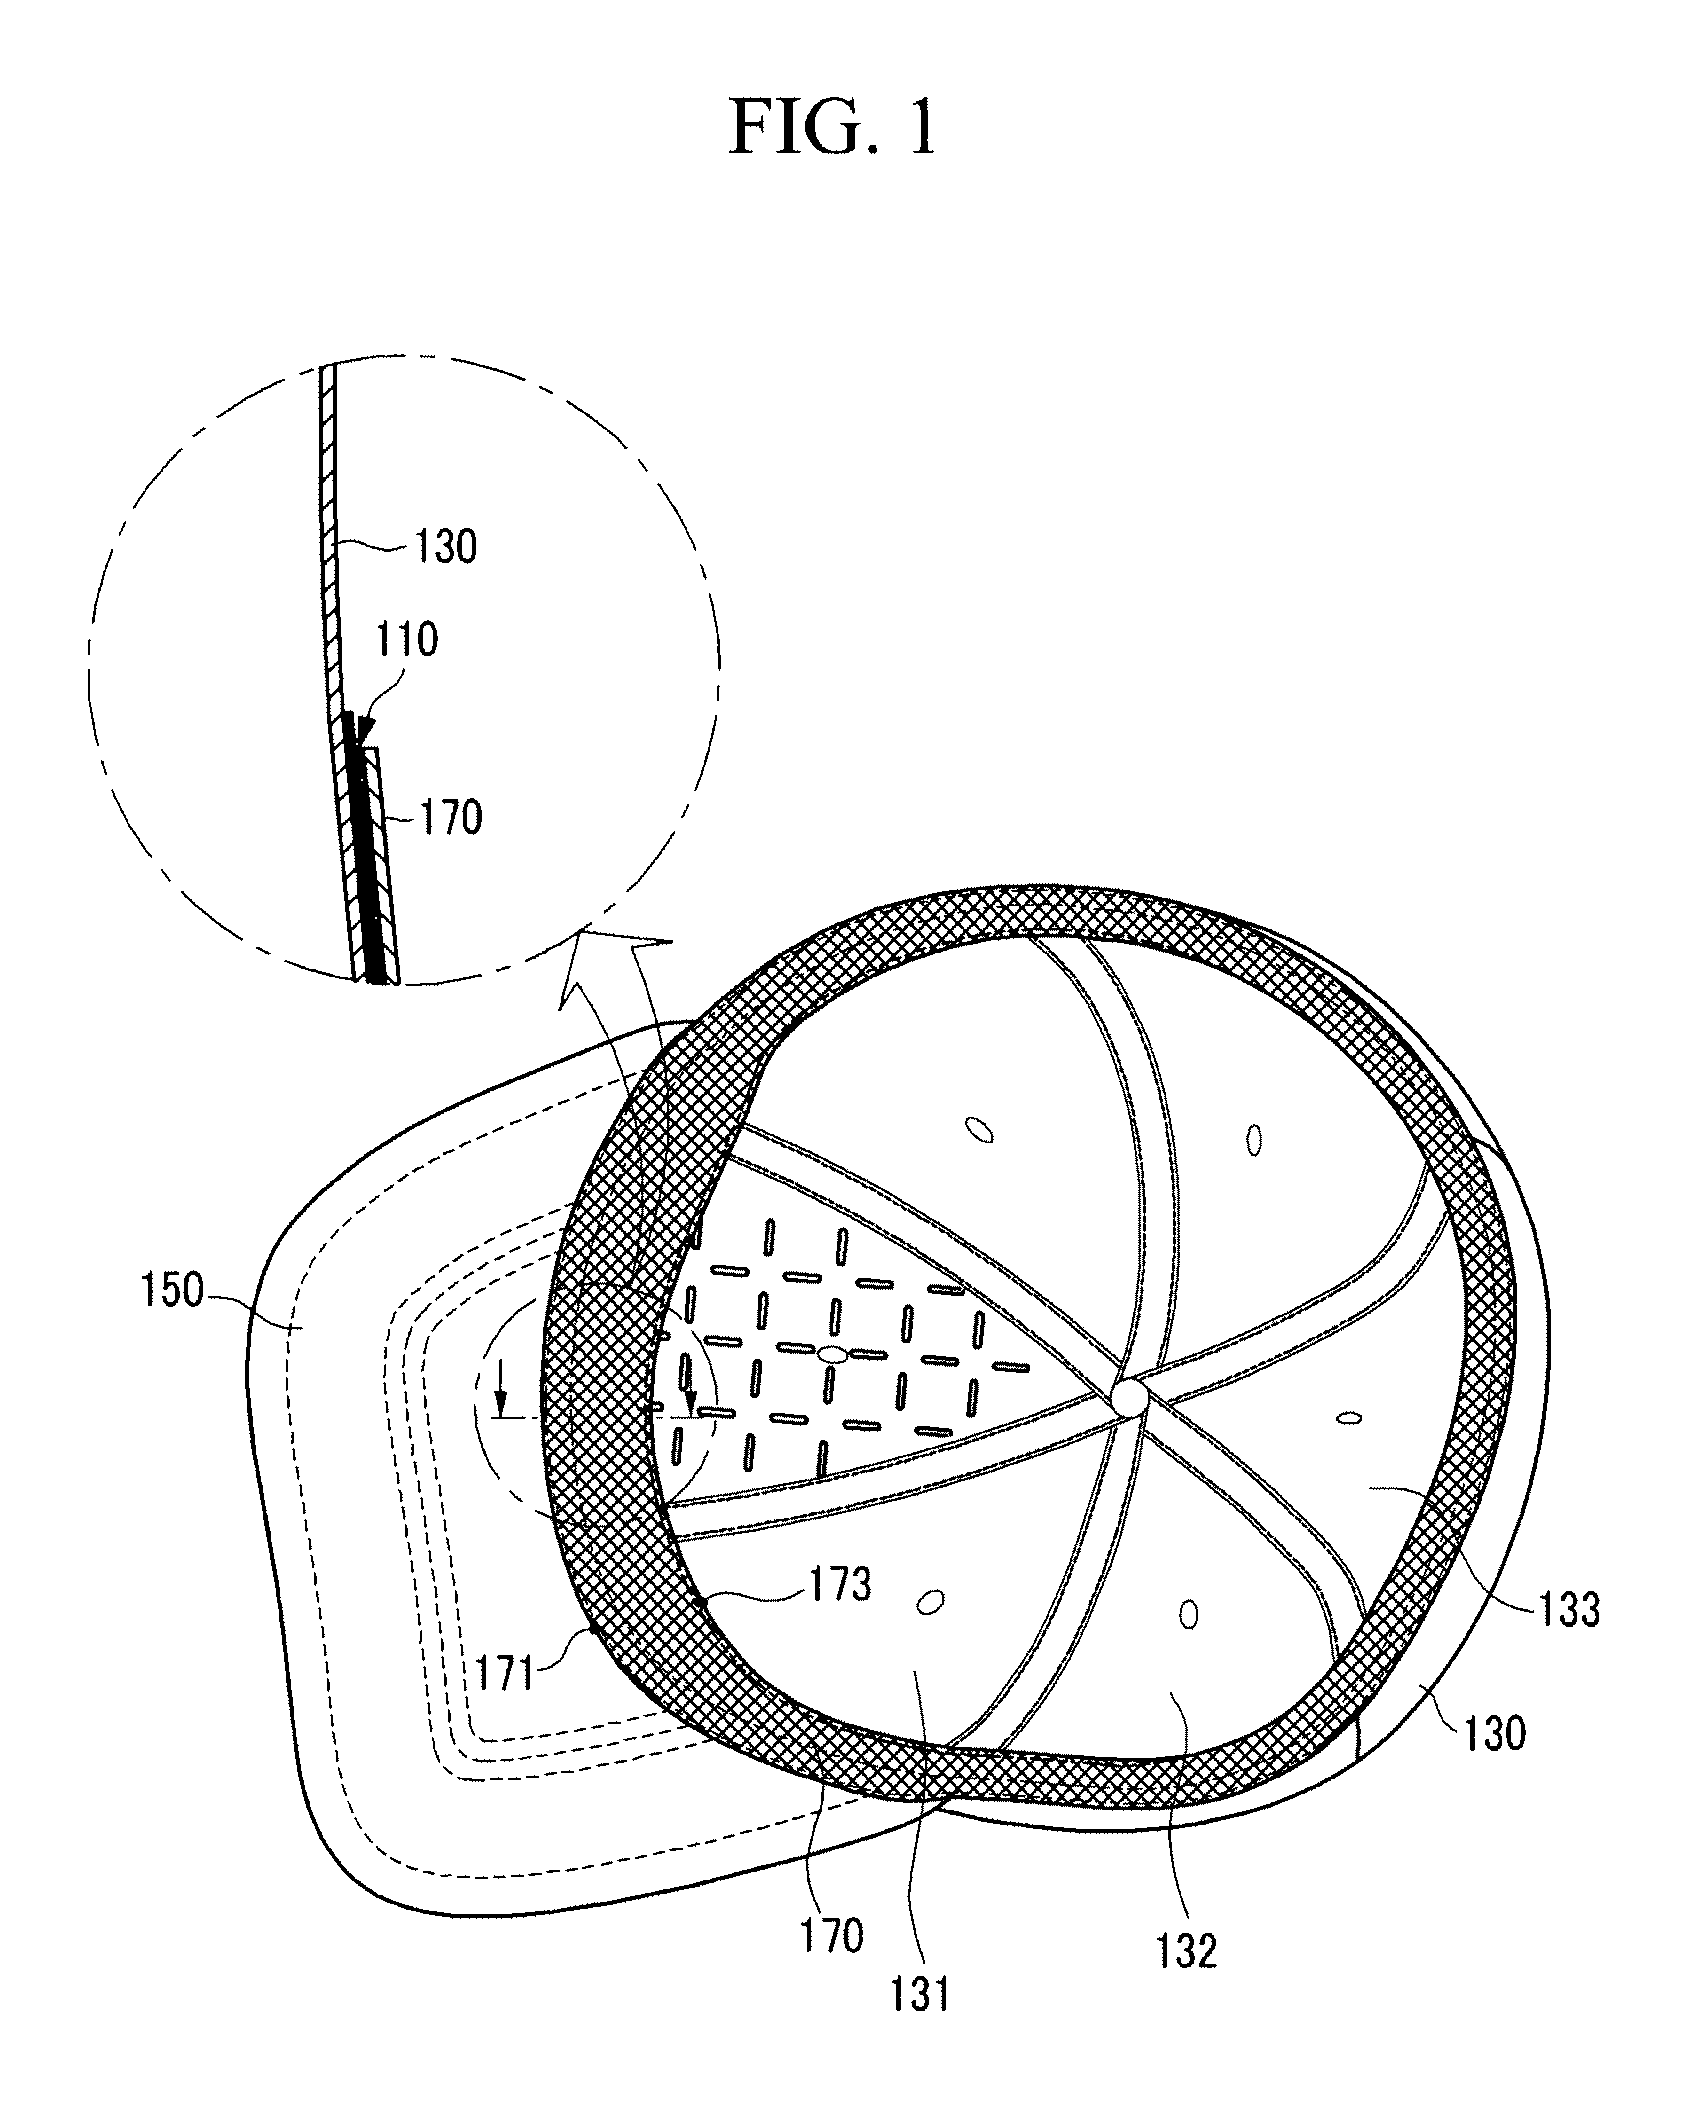 Flexile Plated Cooling Pack of Headwear and Method for Making the Same